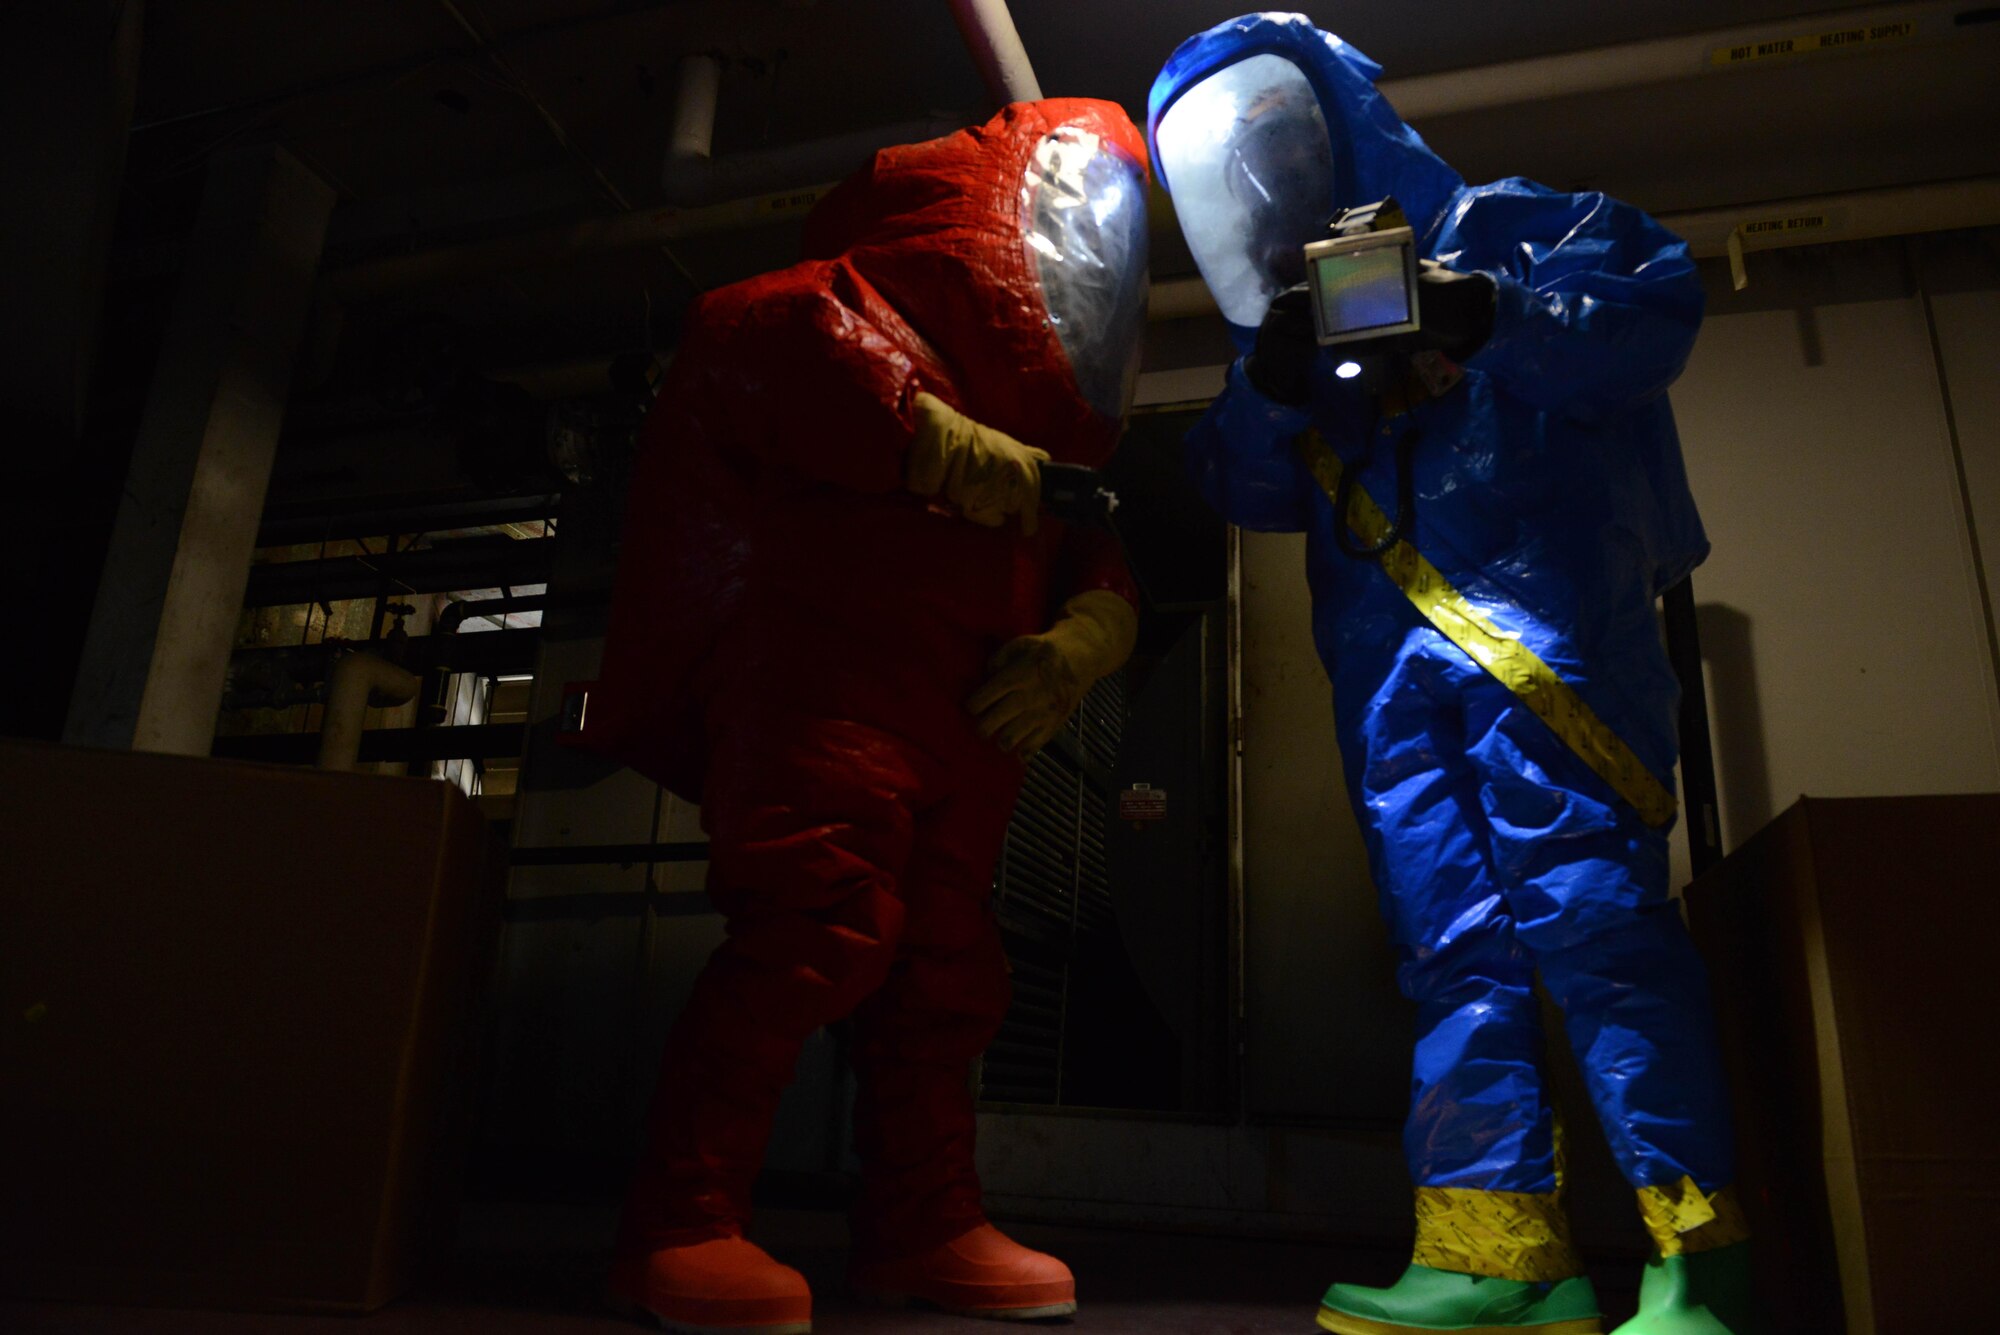 Joint Base Elmendorf-Richardson first responders participated in a Mission Assurance Exercise, June 1, 2017. The exercise tested the installation’s capabilities in dealing with a simulated anthrax attack. (U.S. Air Force photo by Airman 1st Class Javier Alvarez)